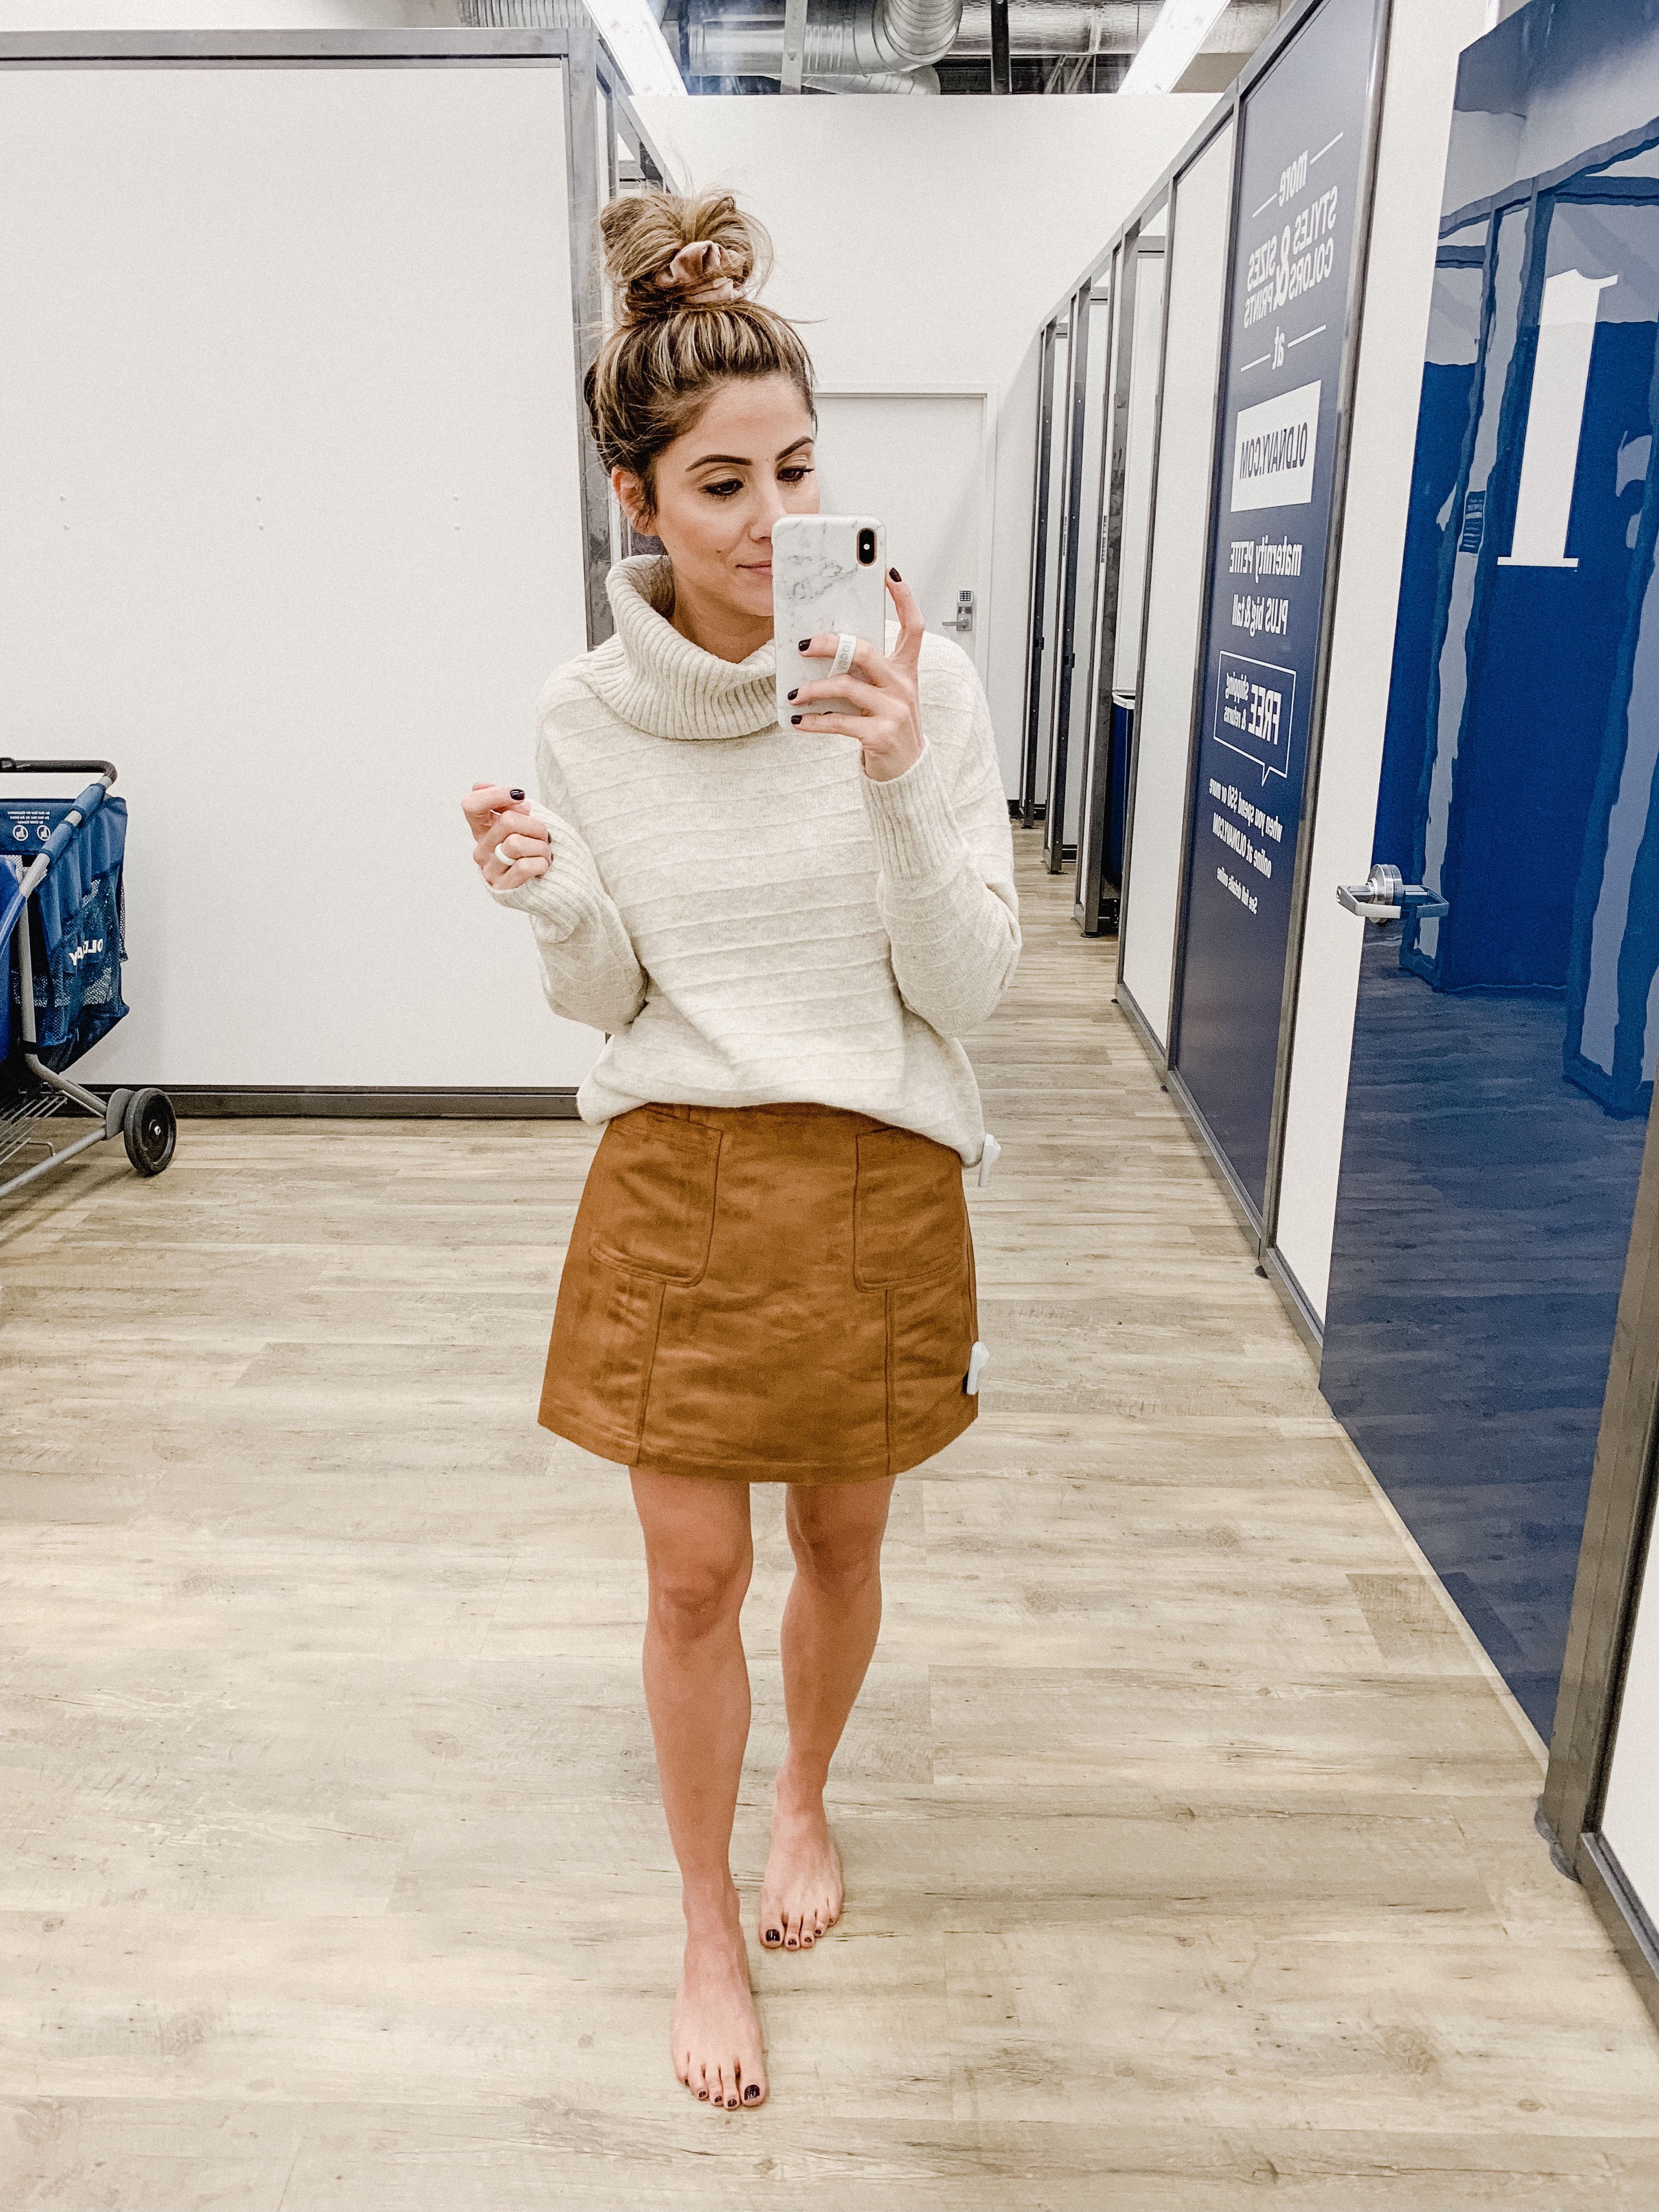 Connecticut life and style blogger Lauren McBride shares a November Old Navy Try On session featuring holiday ready casual and dressier looks!